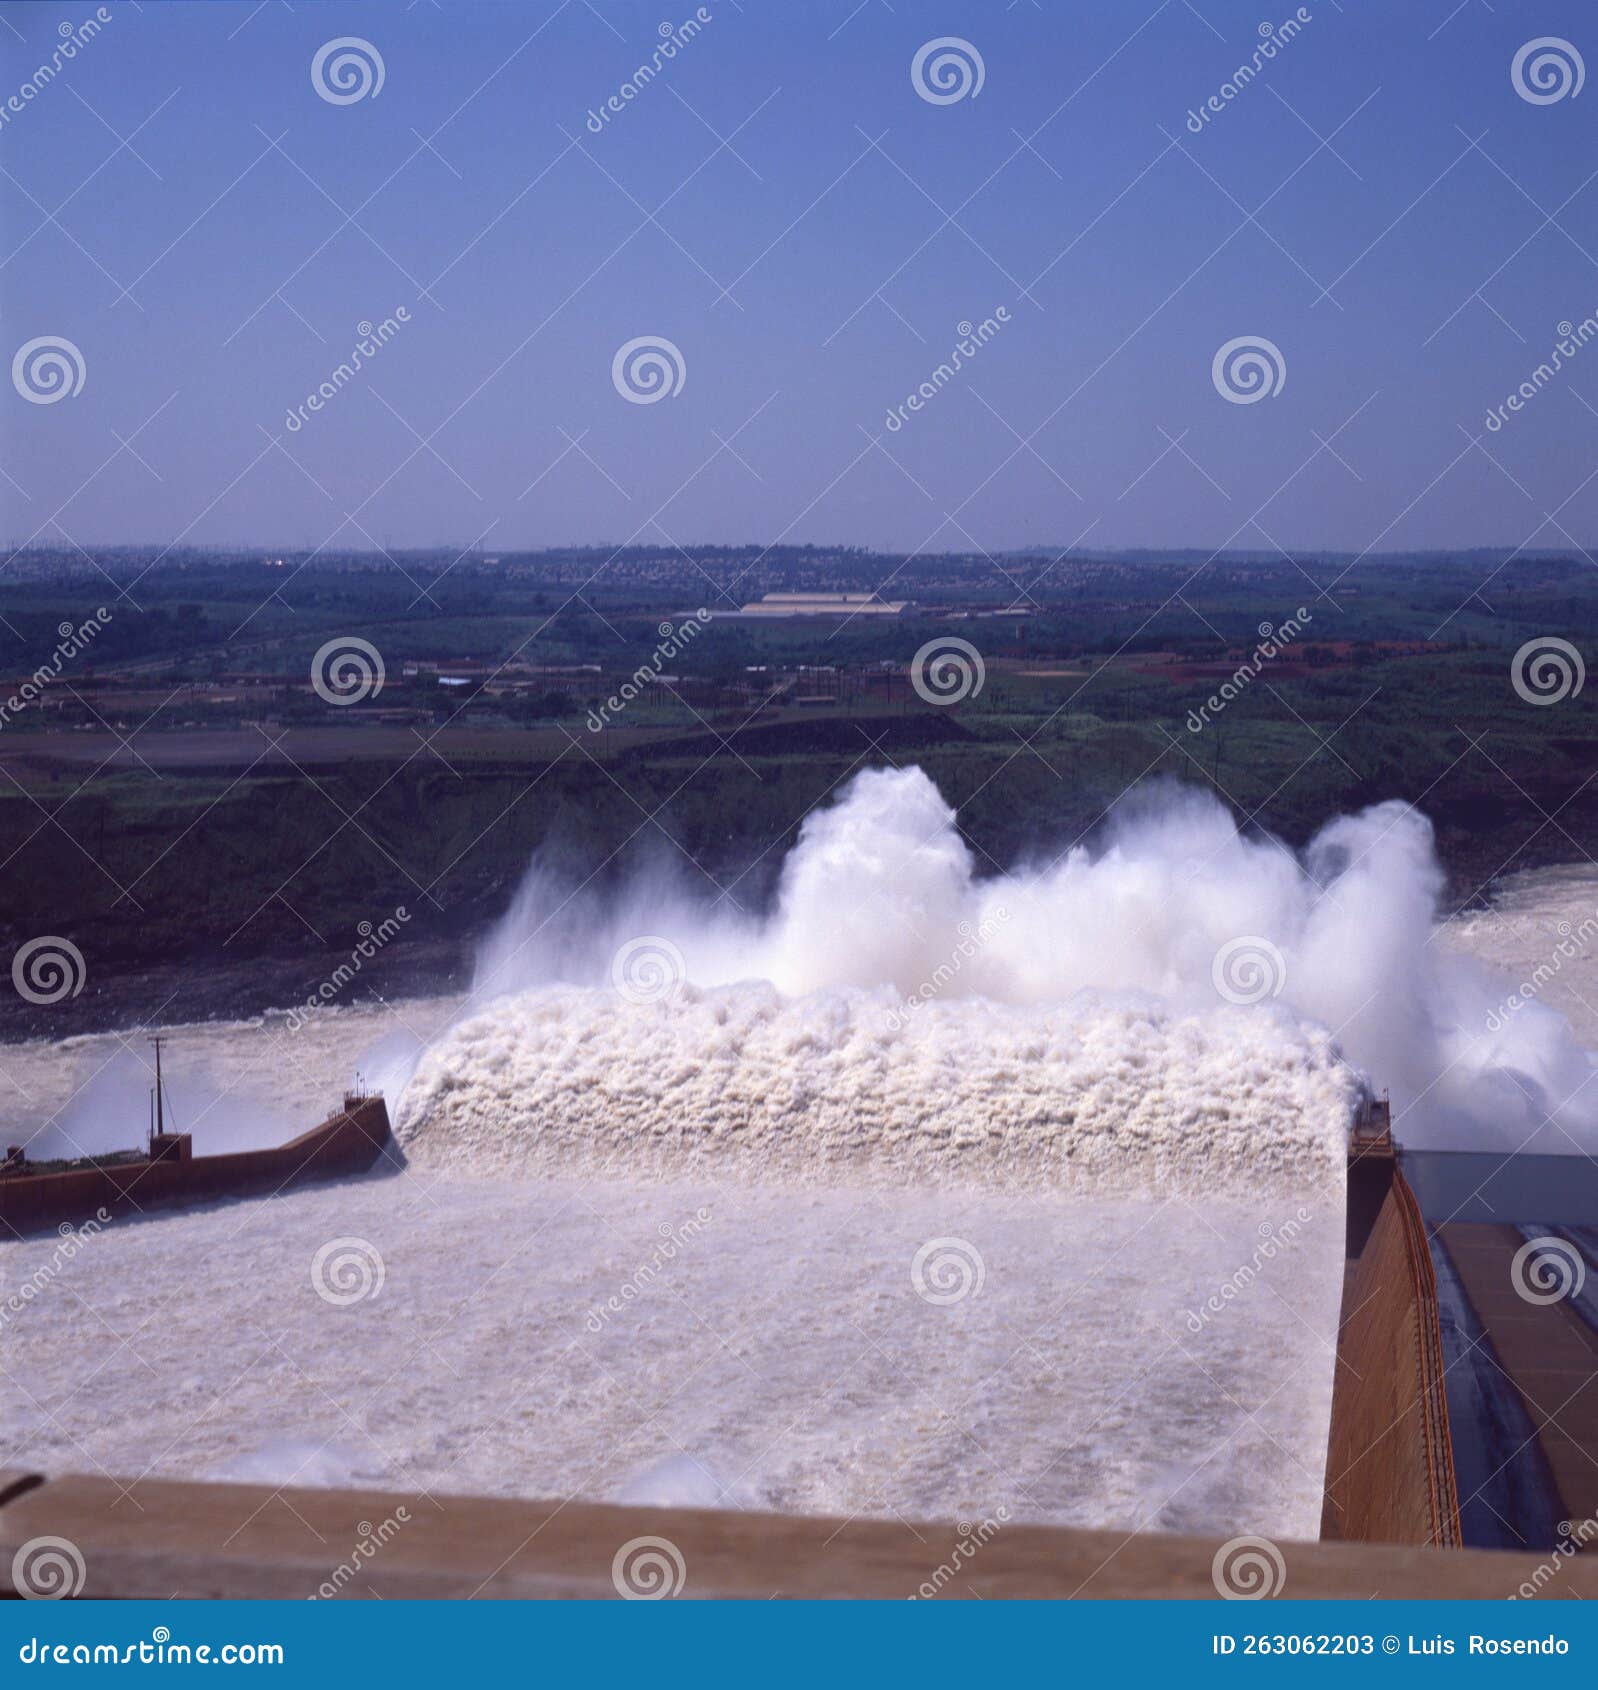 itaipu dam, on the border of brazil and paraguay